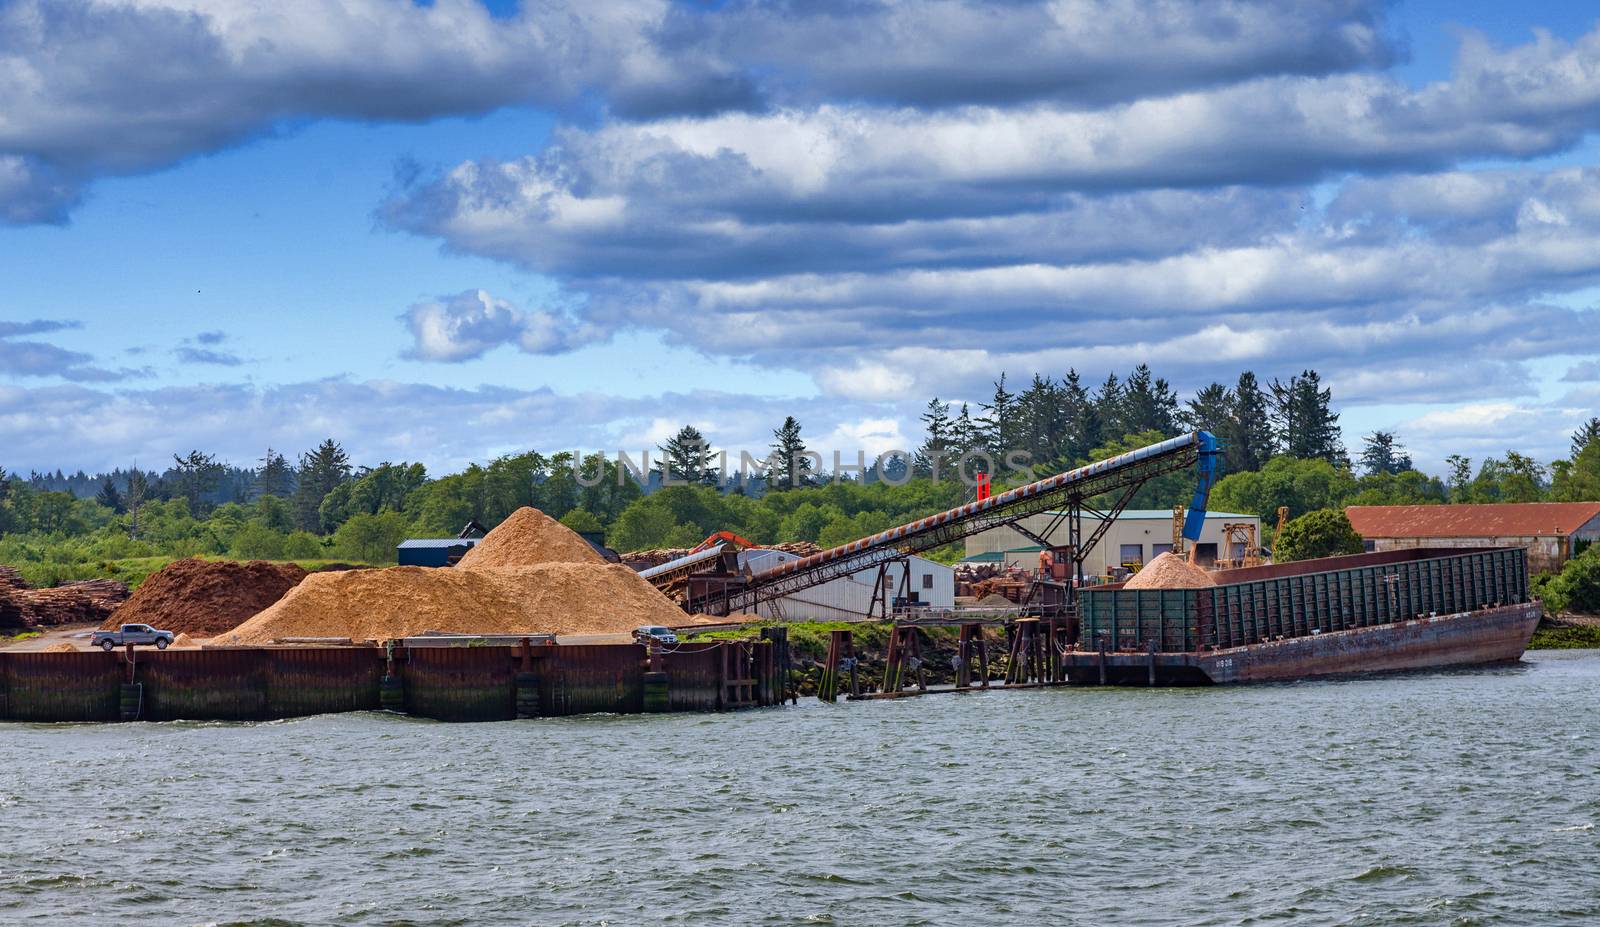 Mountain of Sawdust at Logging Operation in Oregon